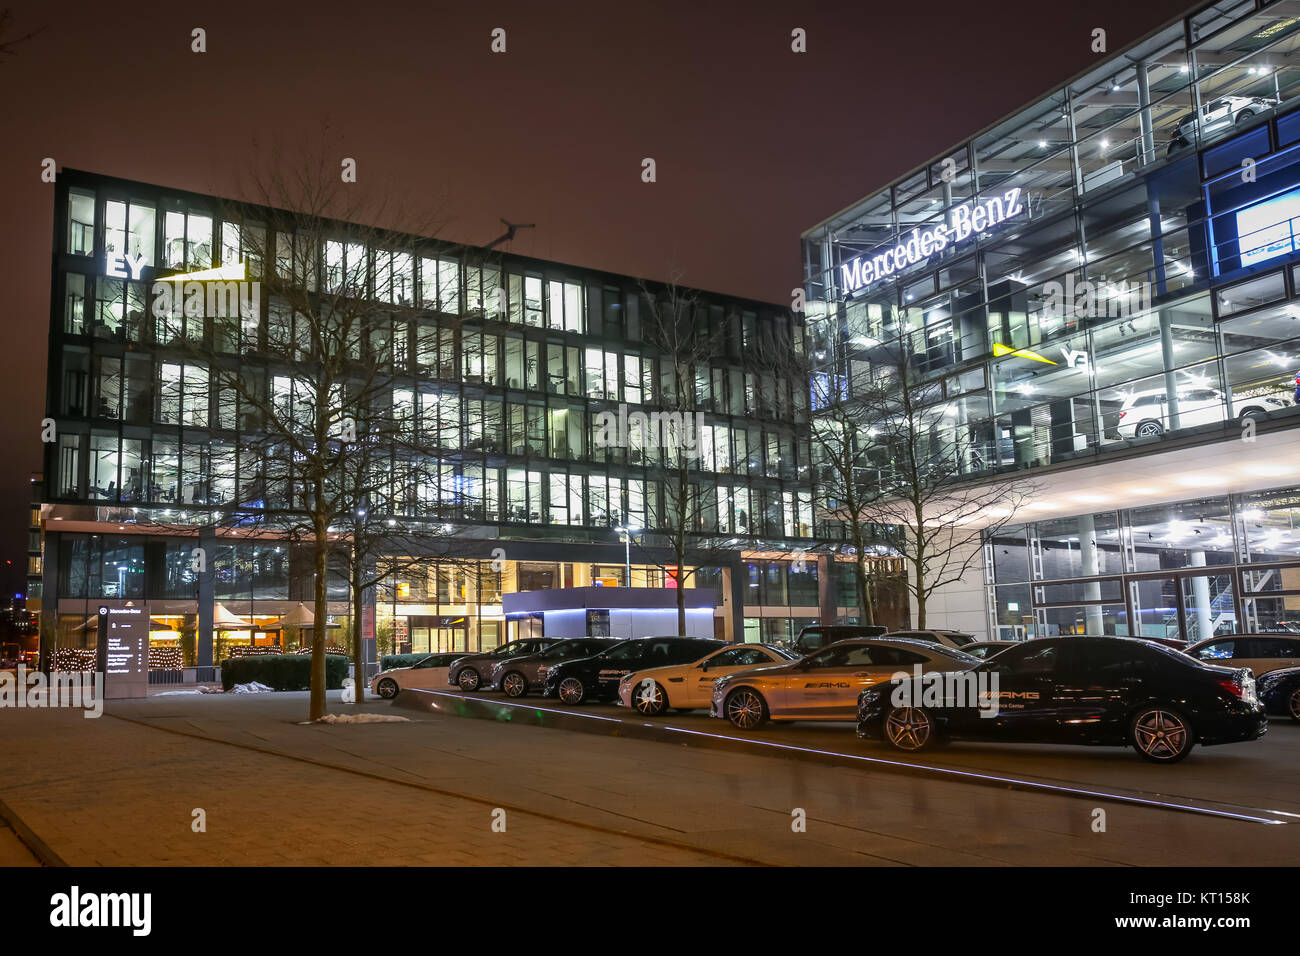 MUNICH, GERMANY - DECEMBER 11, 2017 : Exhibited cars parked in front of the Mercedes Benz dealership building at night in Munich, Germany. Stock Photo